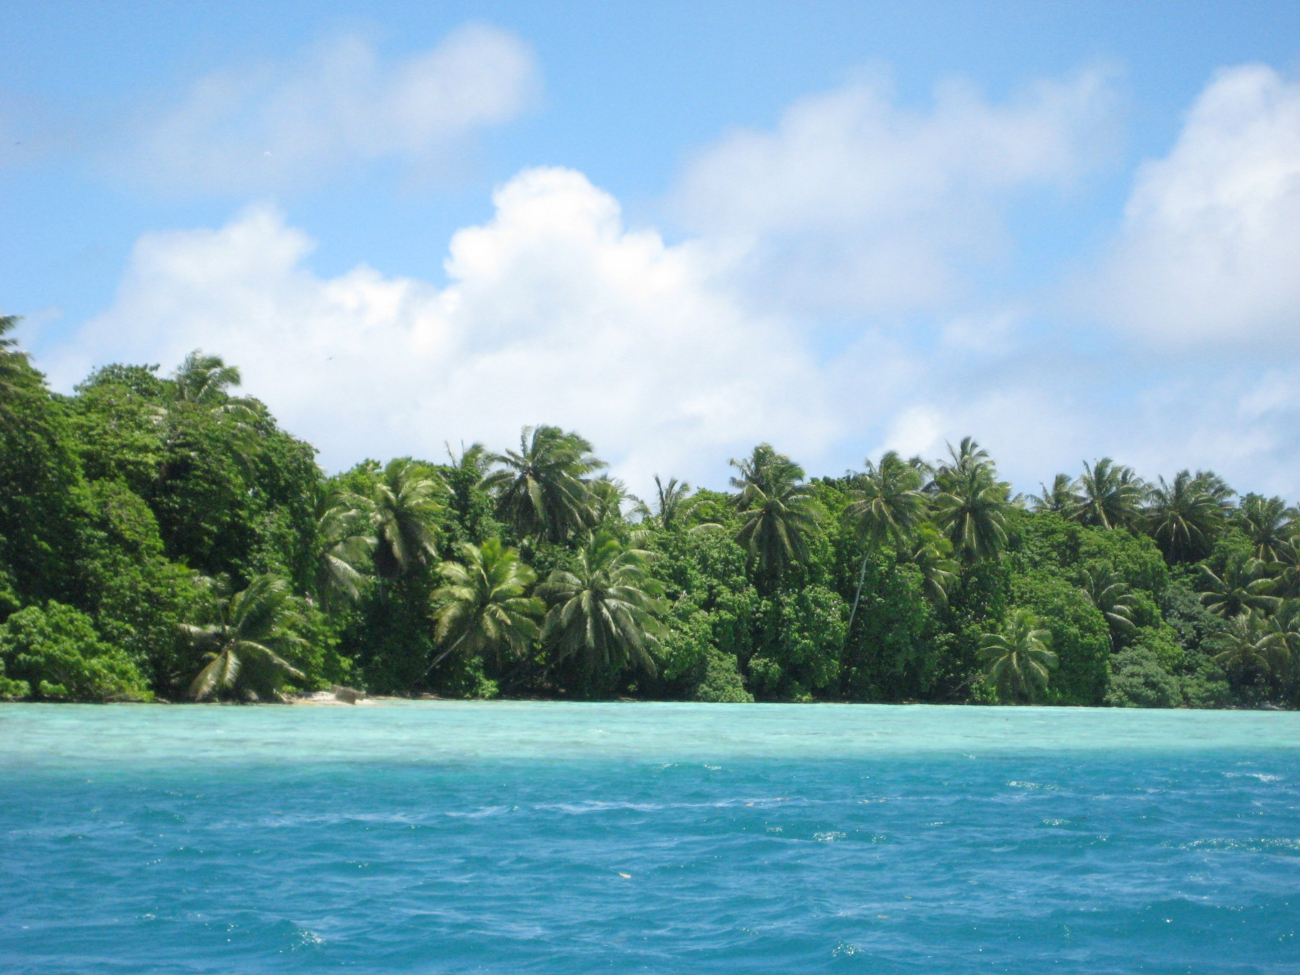 Vegetation including the ubiquitous palm trees of the tropical Pacific coverPalmyra Island and its associated offshore islets